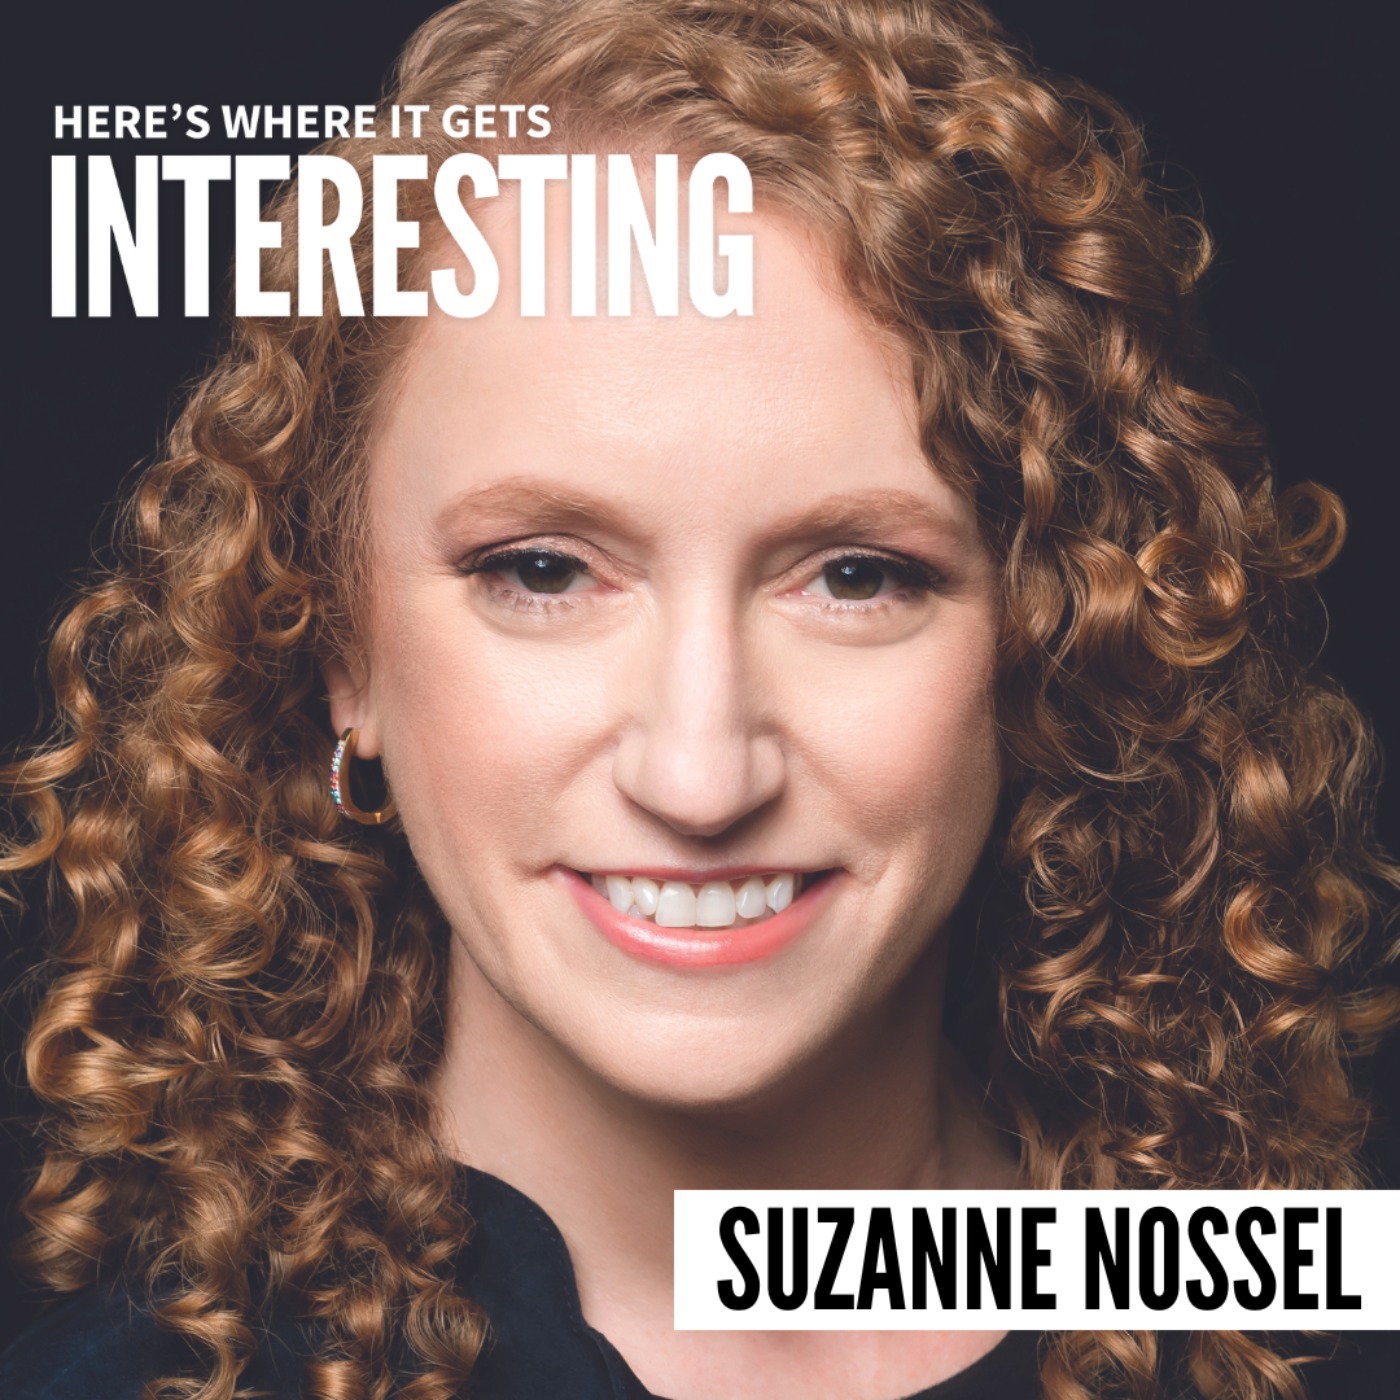 Banning Books with Suzanne Nossel